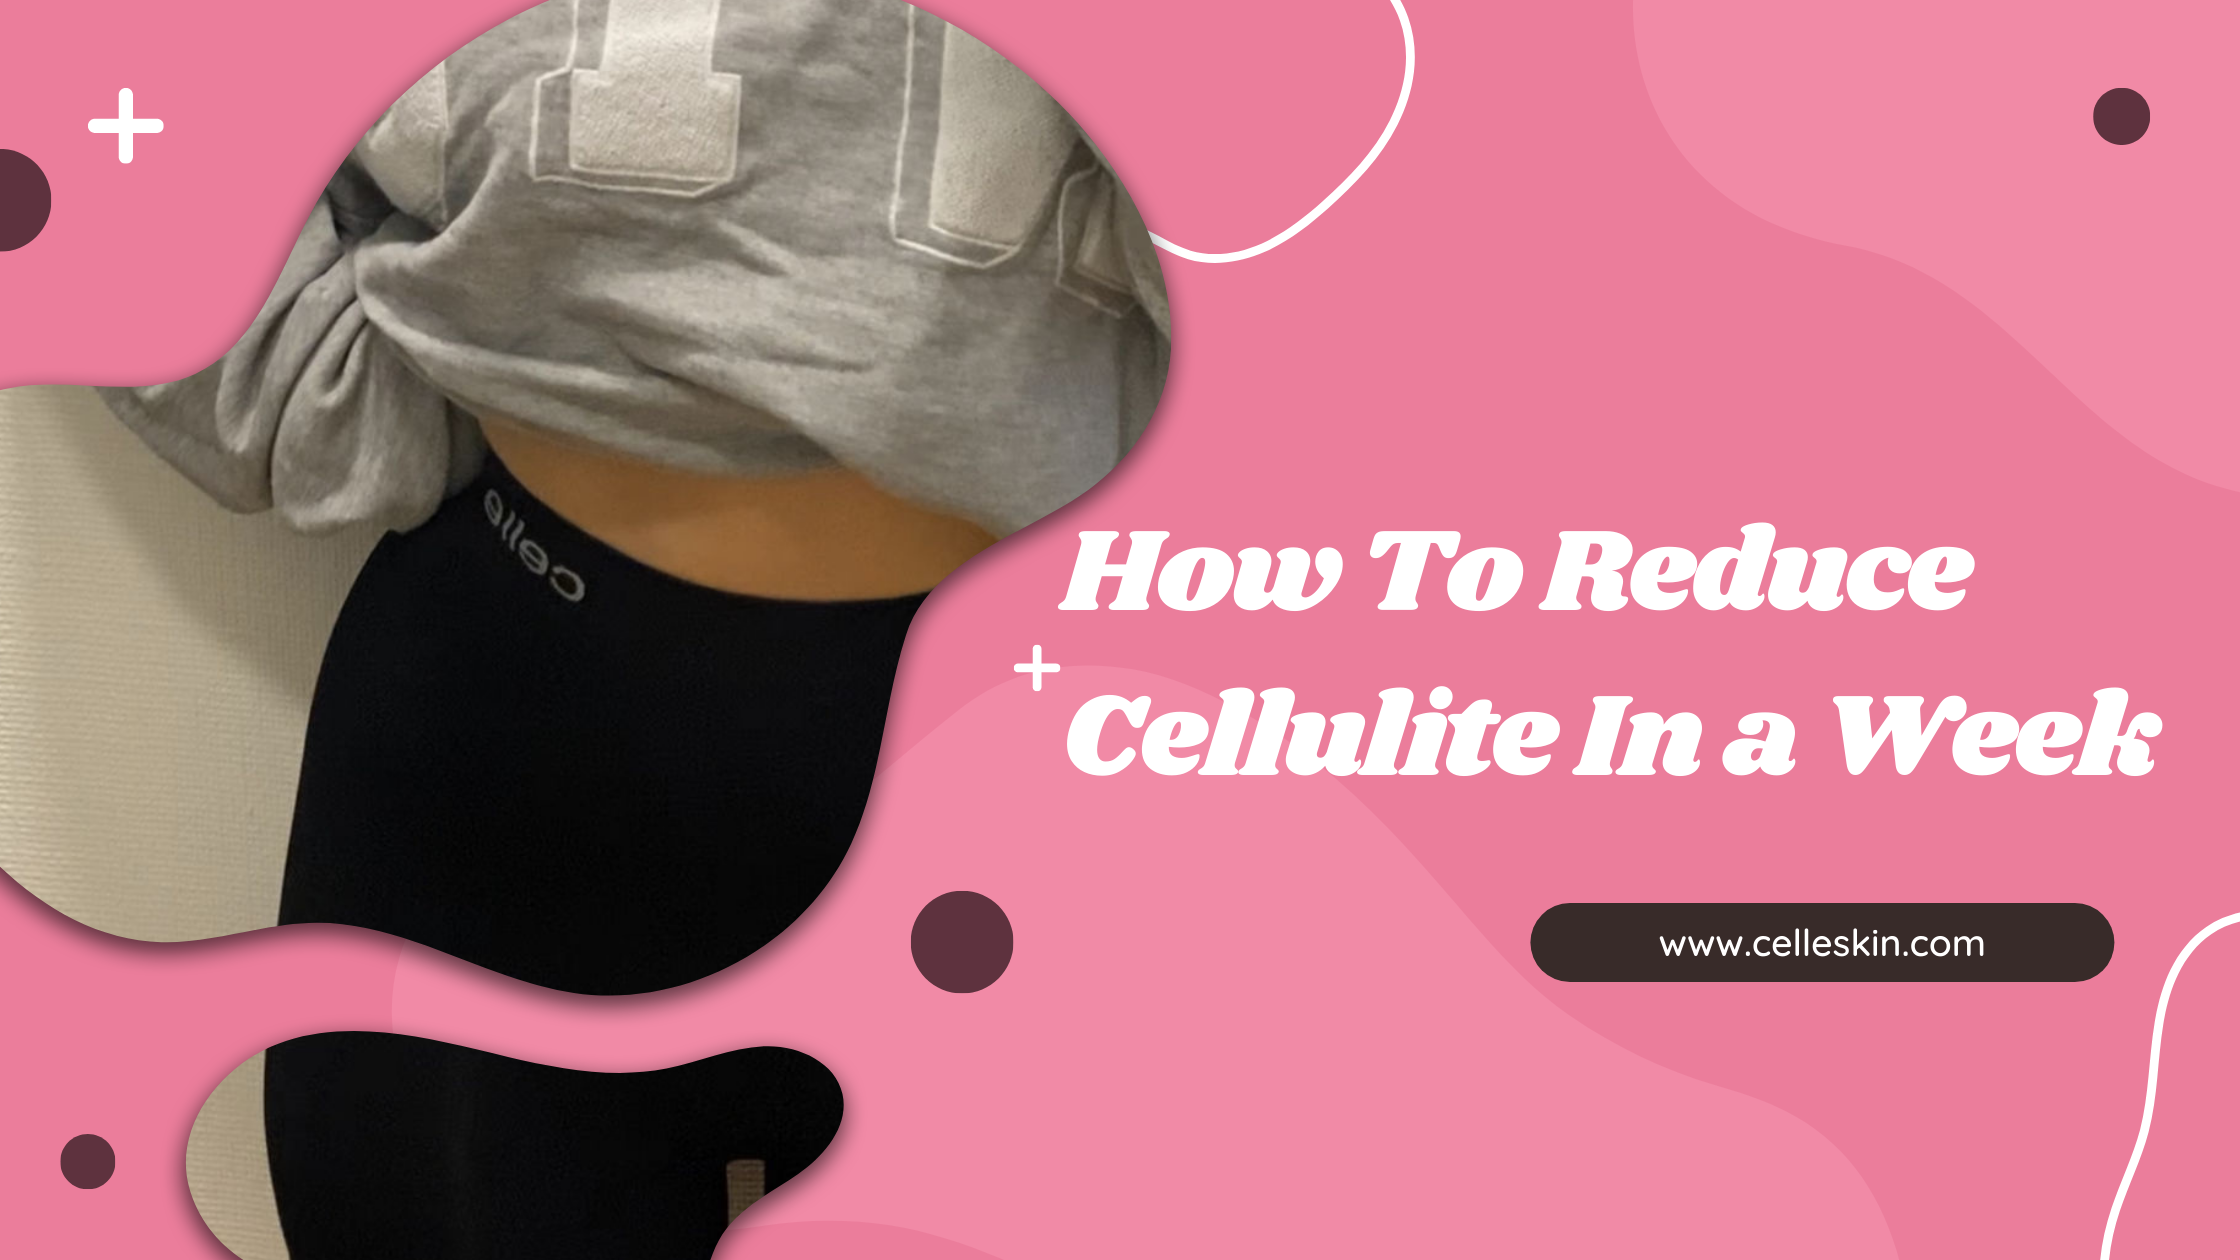 8 tips you need to reducing cellulite,The best method